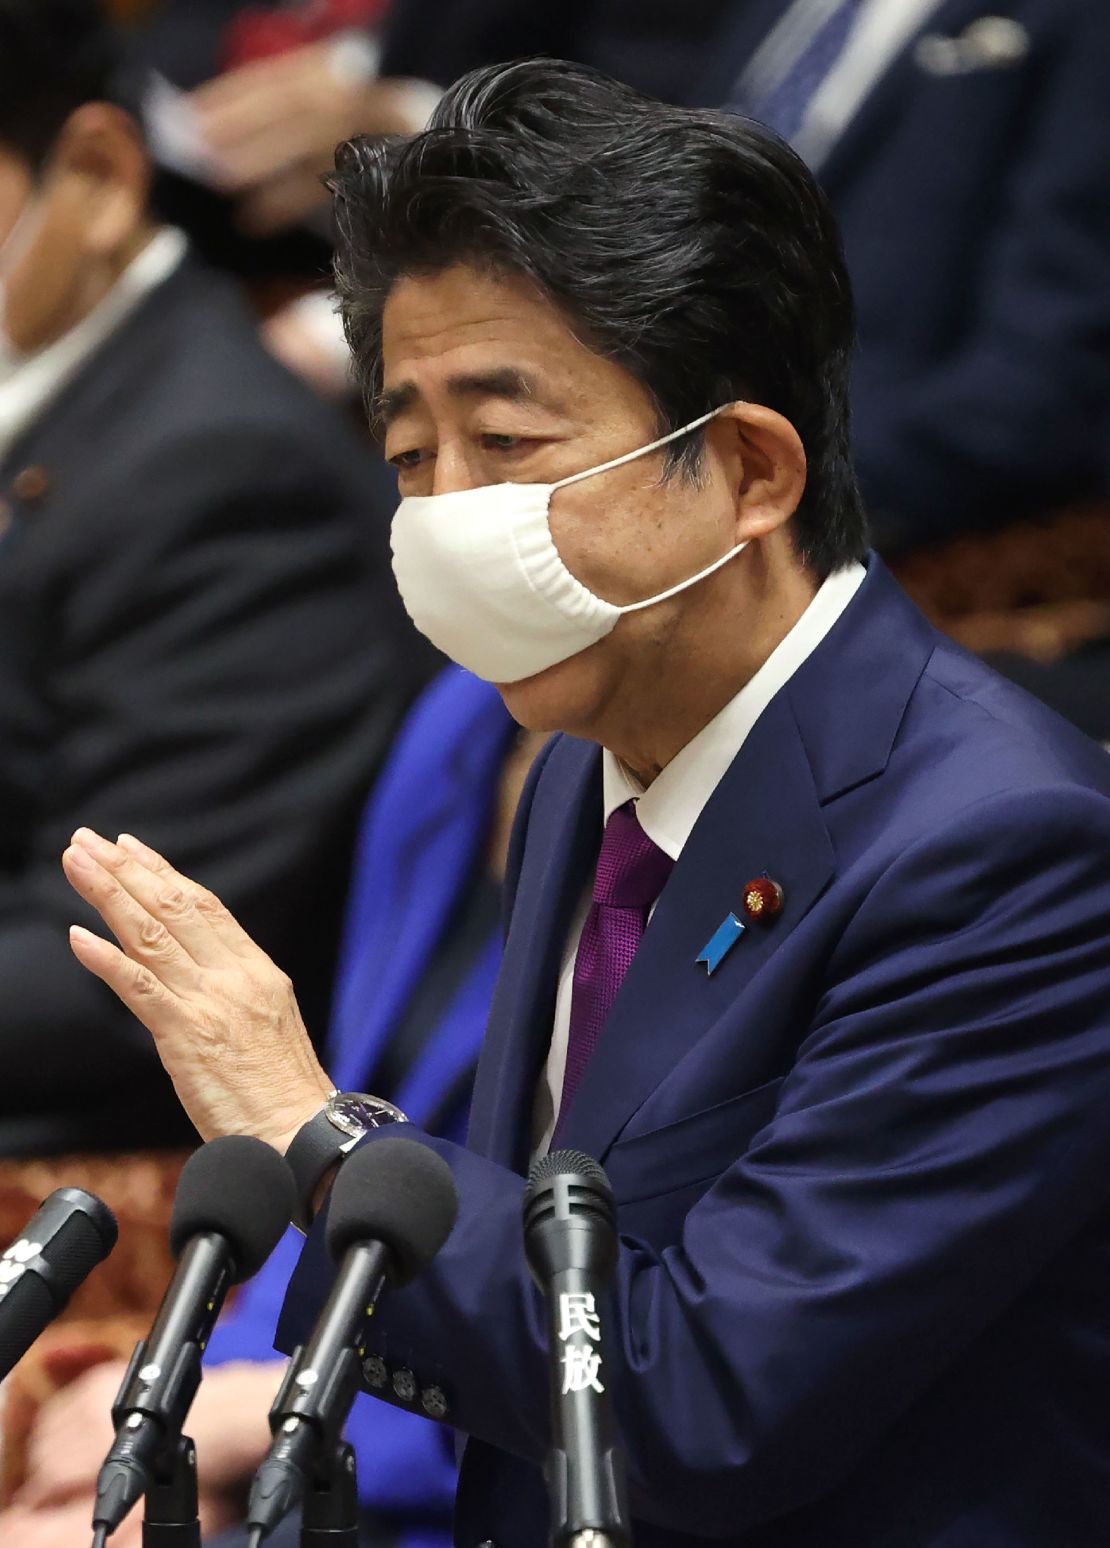 Japan's Prime Minister Shinzo Abe wearing a face mask amid concerns over the spread of coronavirus speaks during a budget committee session in the lower house at parliament in Tokyo on June 10, 2020.